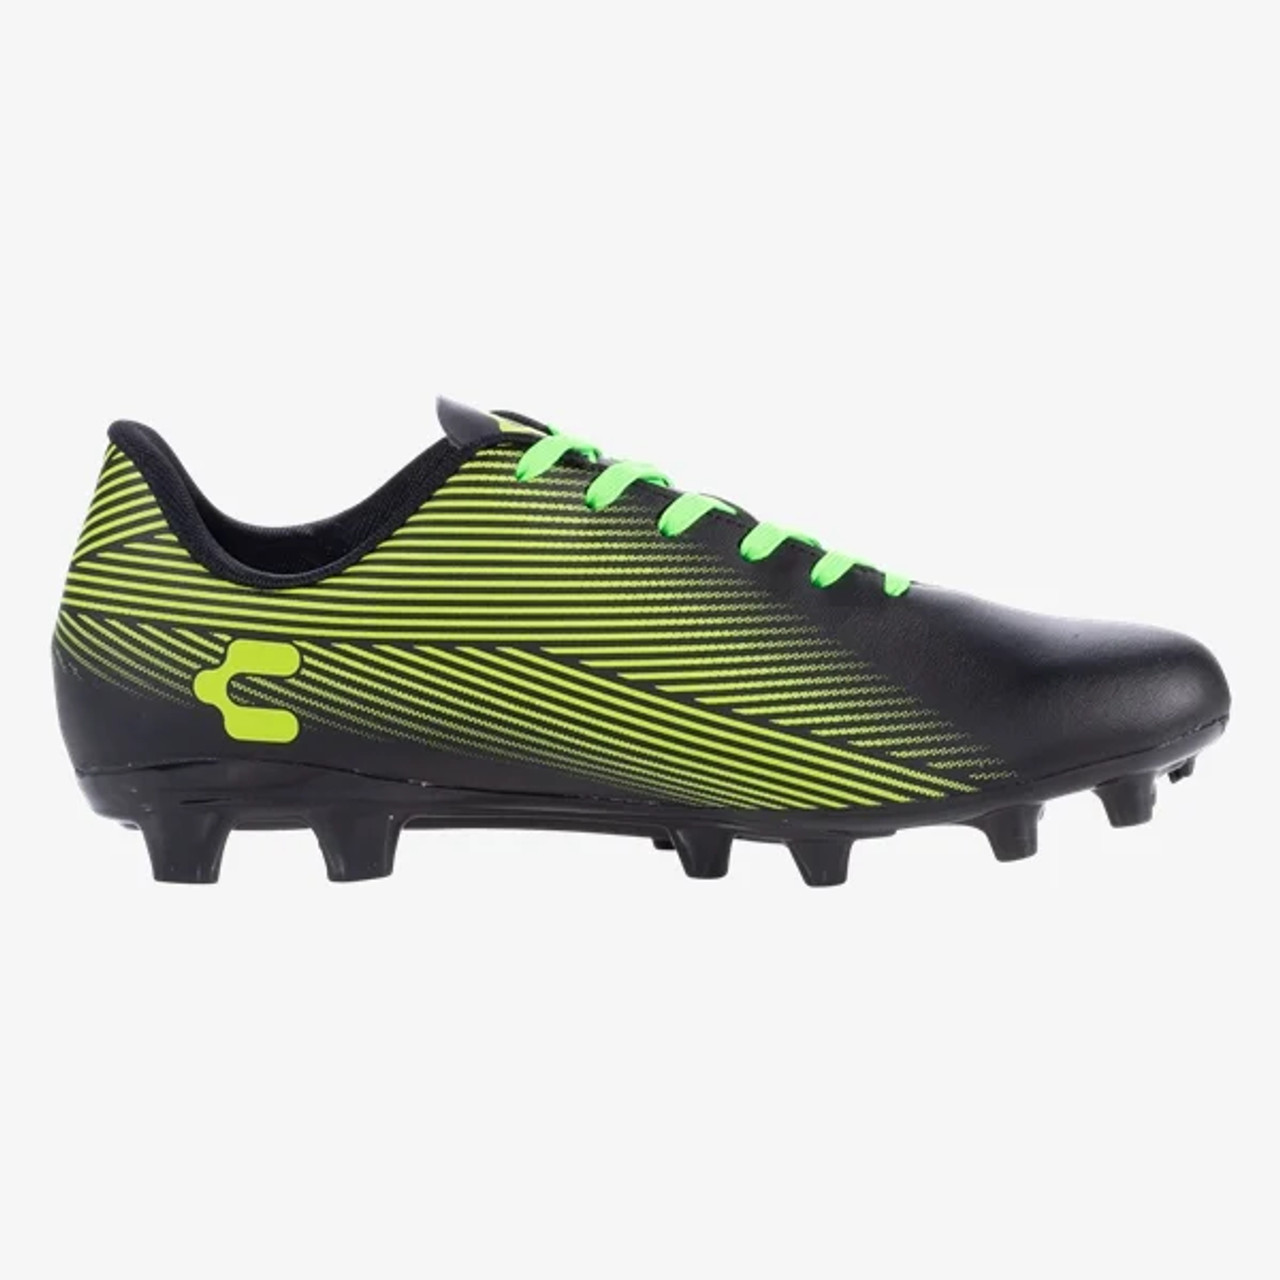 Charly Grasshopper Firm Ground Soccer Cleats 002/Black-Lime - Chicago Soccer